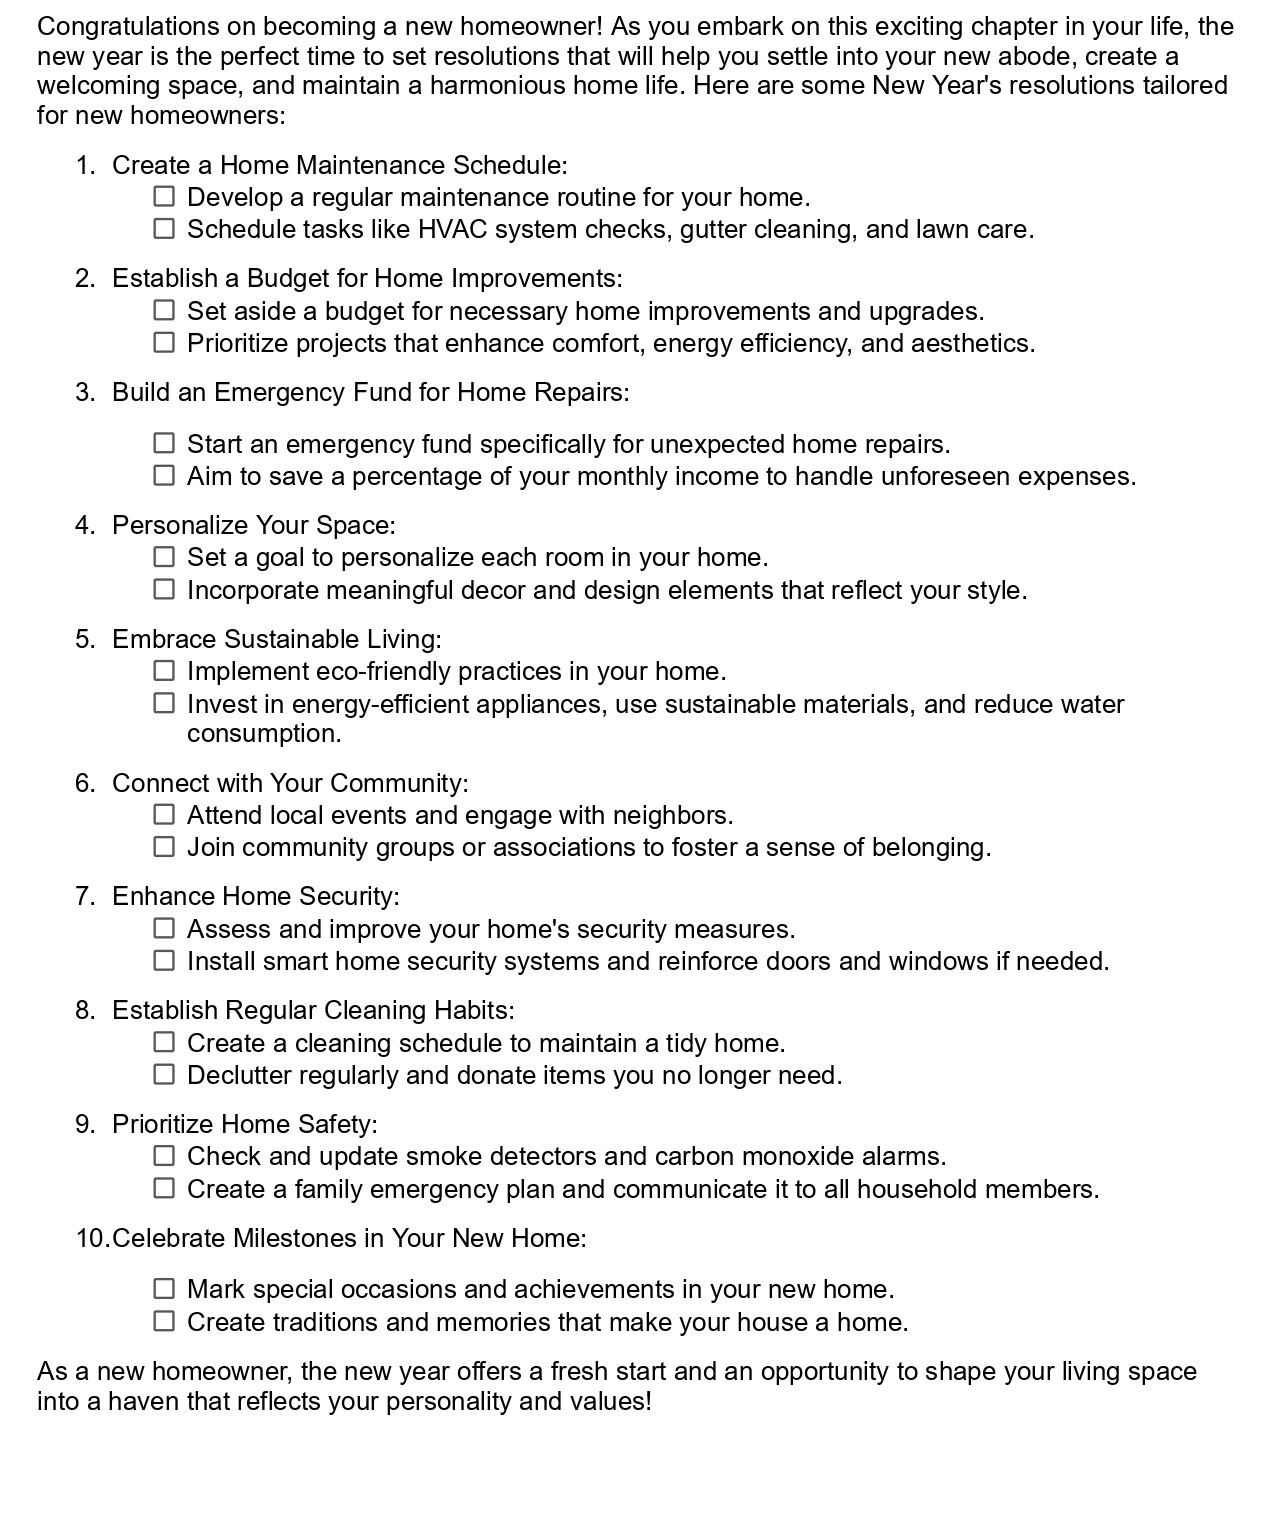 The Blog Doc - New Years Checklist_page-0001.jpg